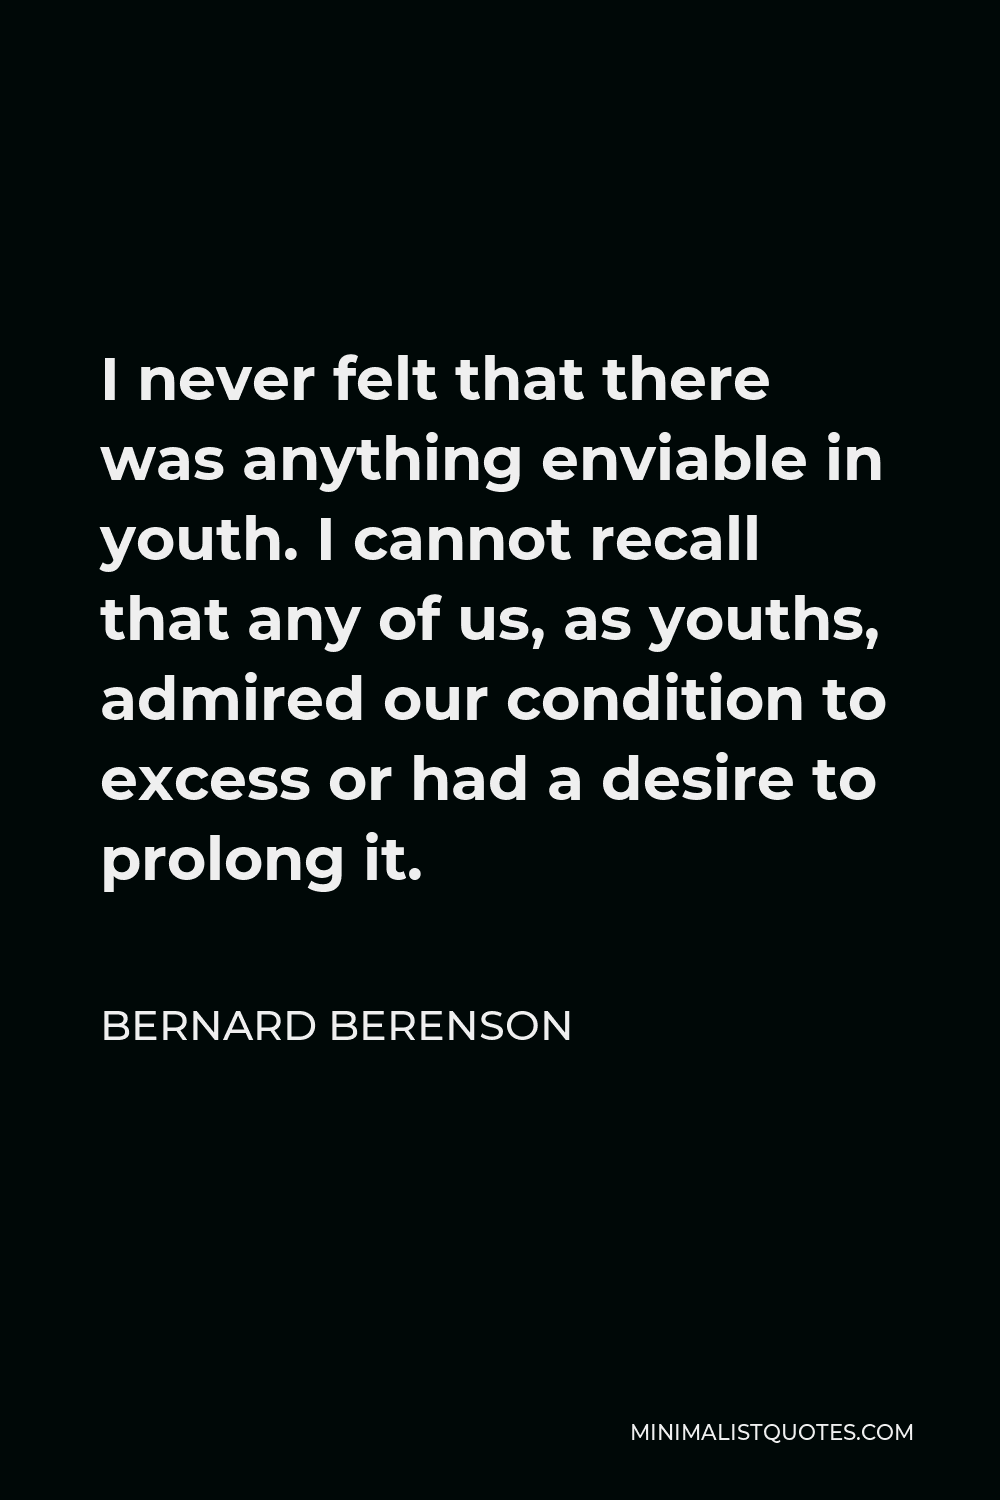 Bernard Berenson Quote - I never felt that there was anything enviable in youth. I cannot recall that any of us, as youths, admired our condition to excess or had a desire to prolong it.